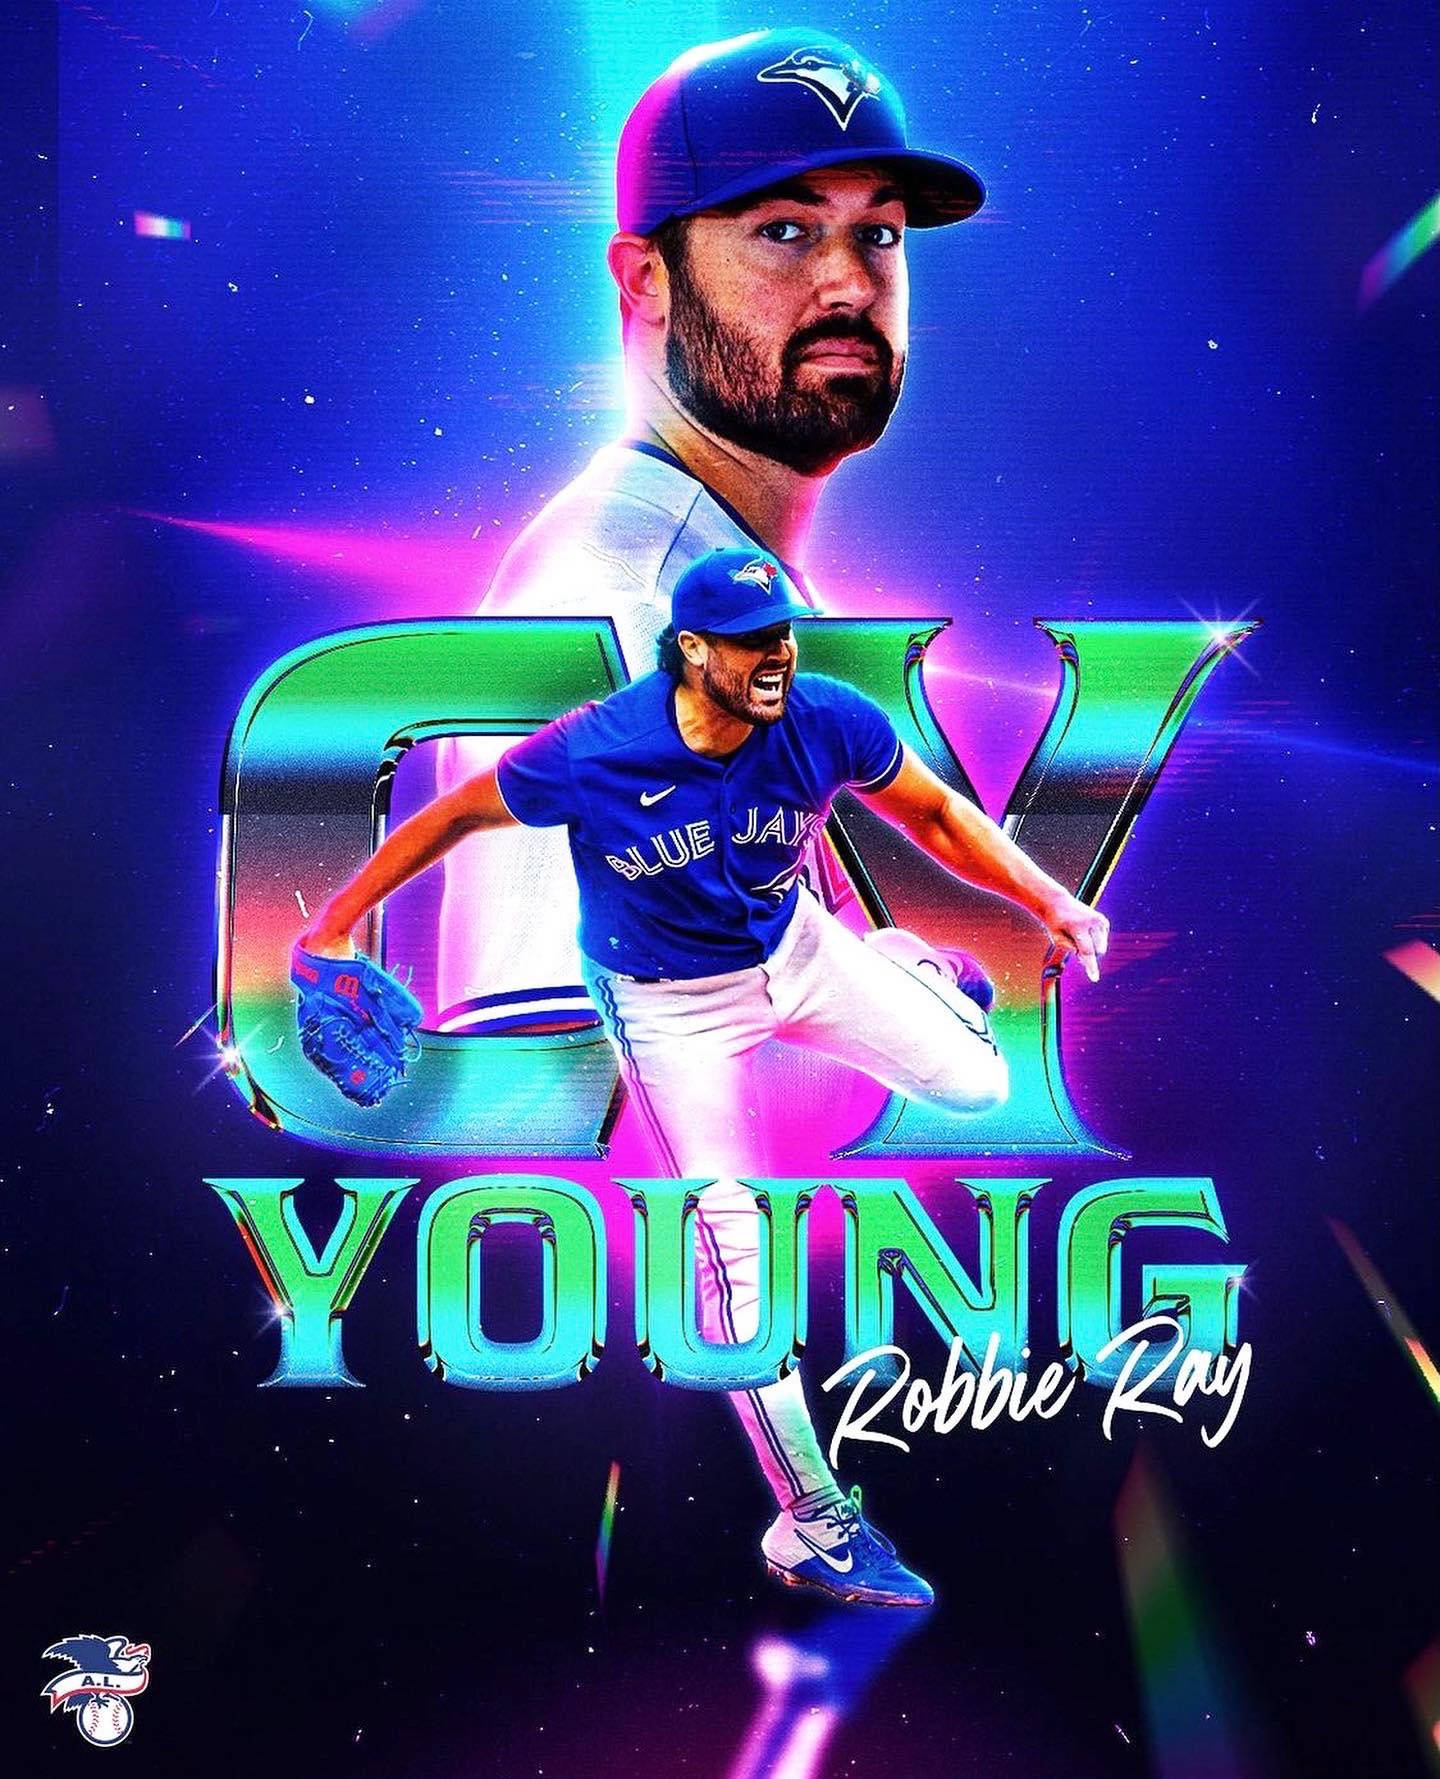 Robbieray Cy Young Affisch Wallpaper